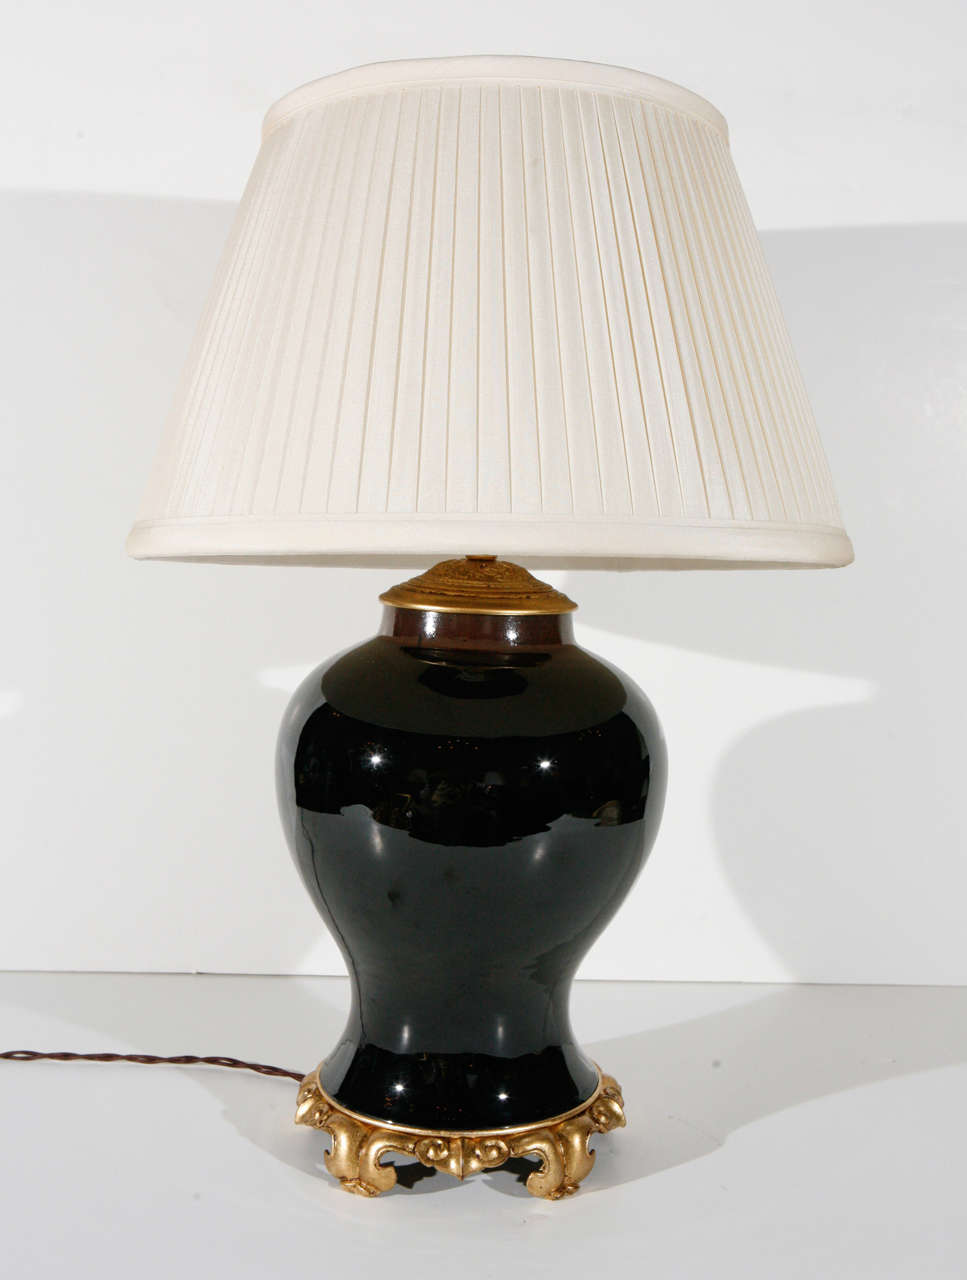 A robust, hand-painted and richly glazed table lamp atop a pierced, ormolu base. Surmounted by a custom, pleated, silk shade.

Height including shade: 27 inches
Diameter including shade: 18 inches